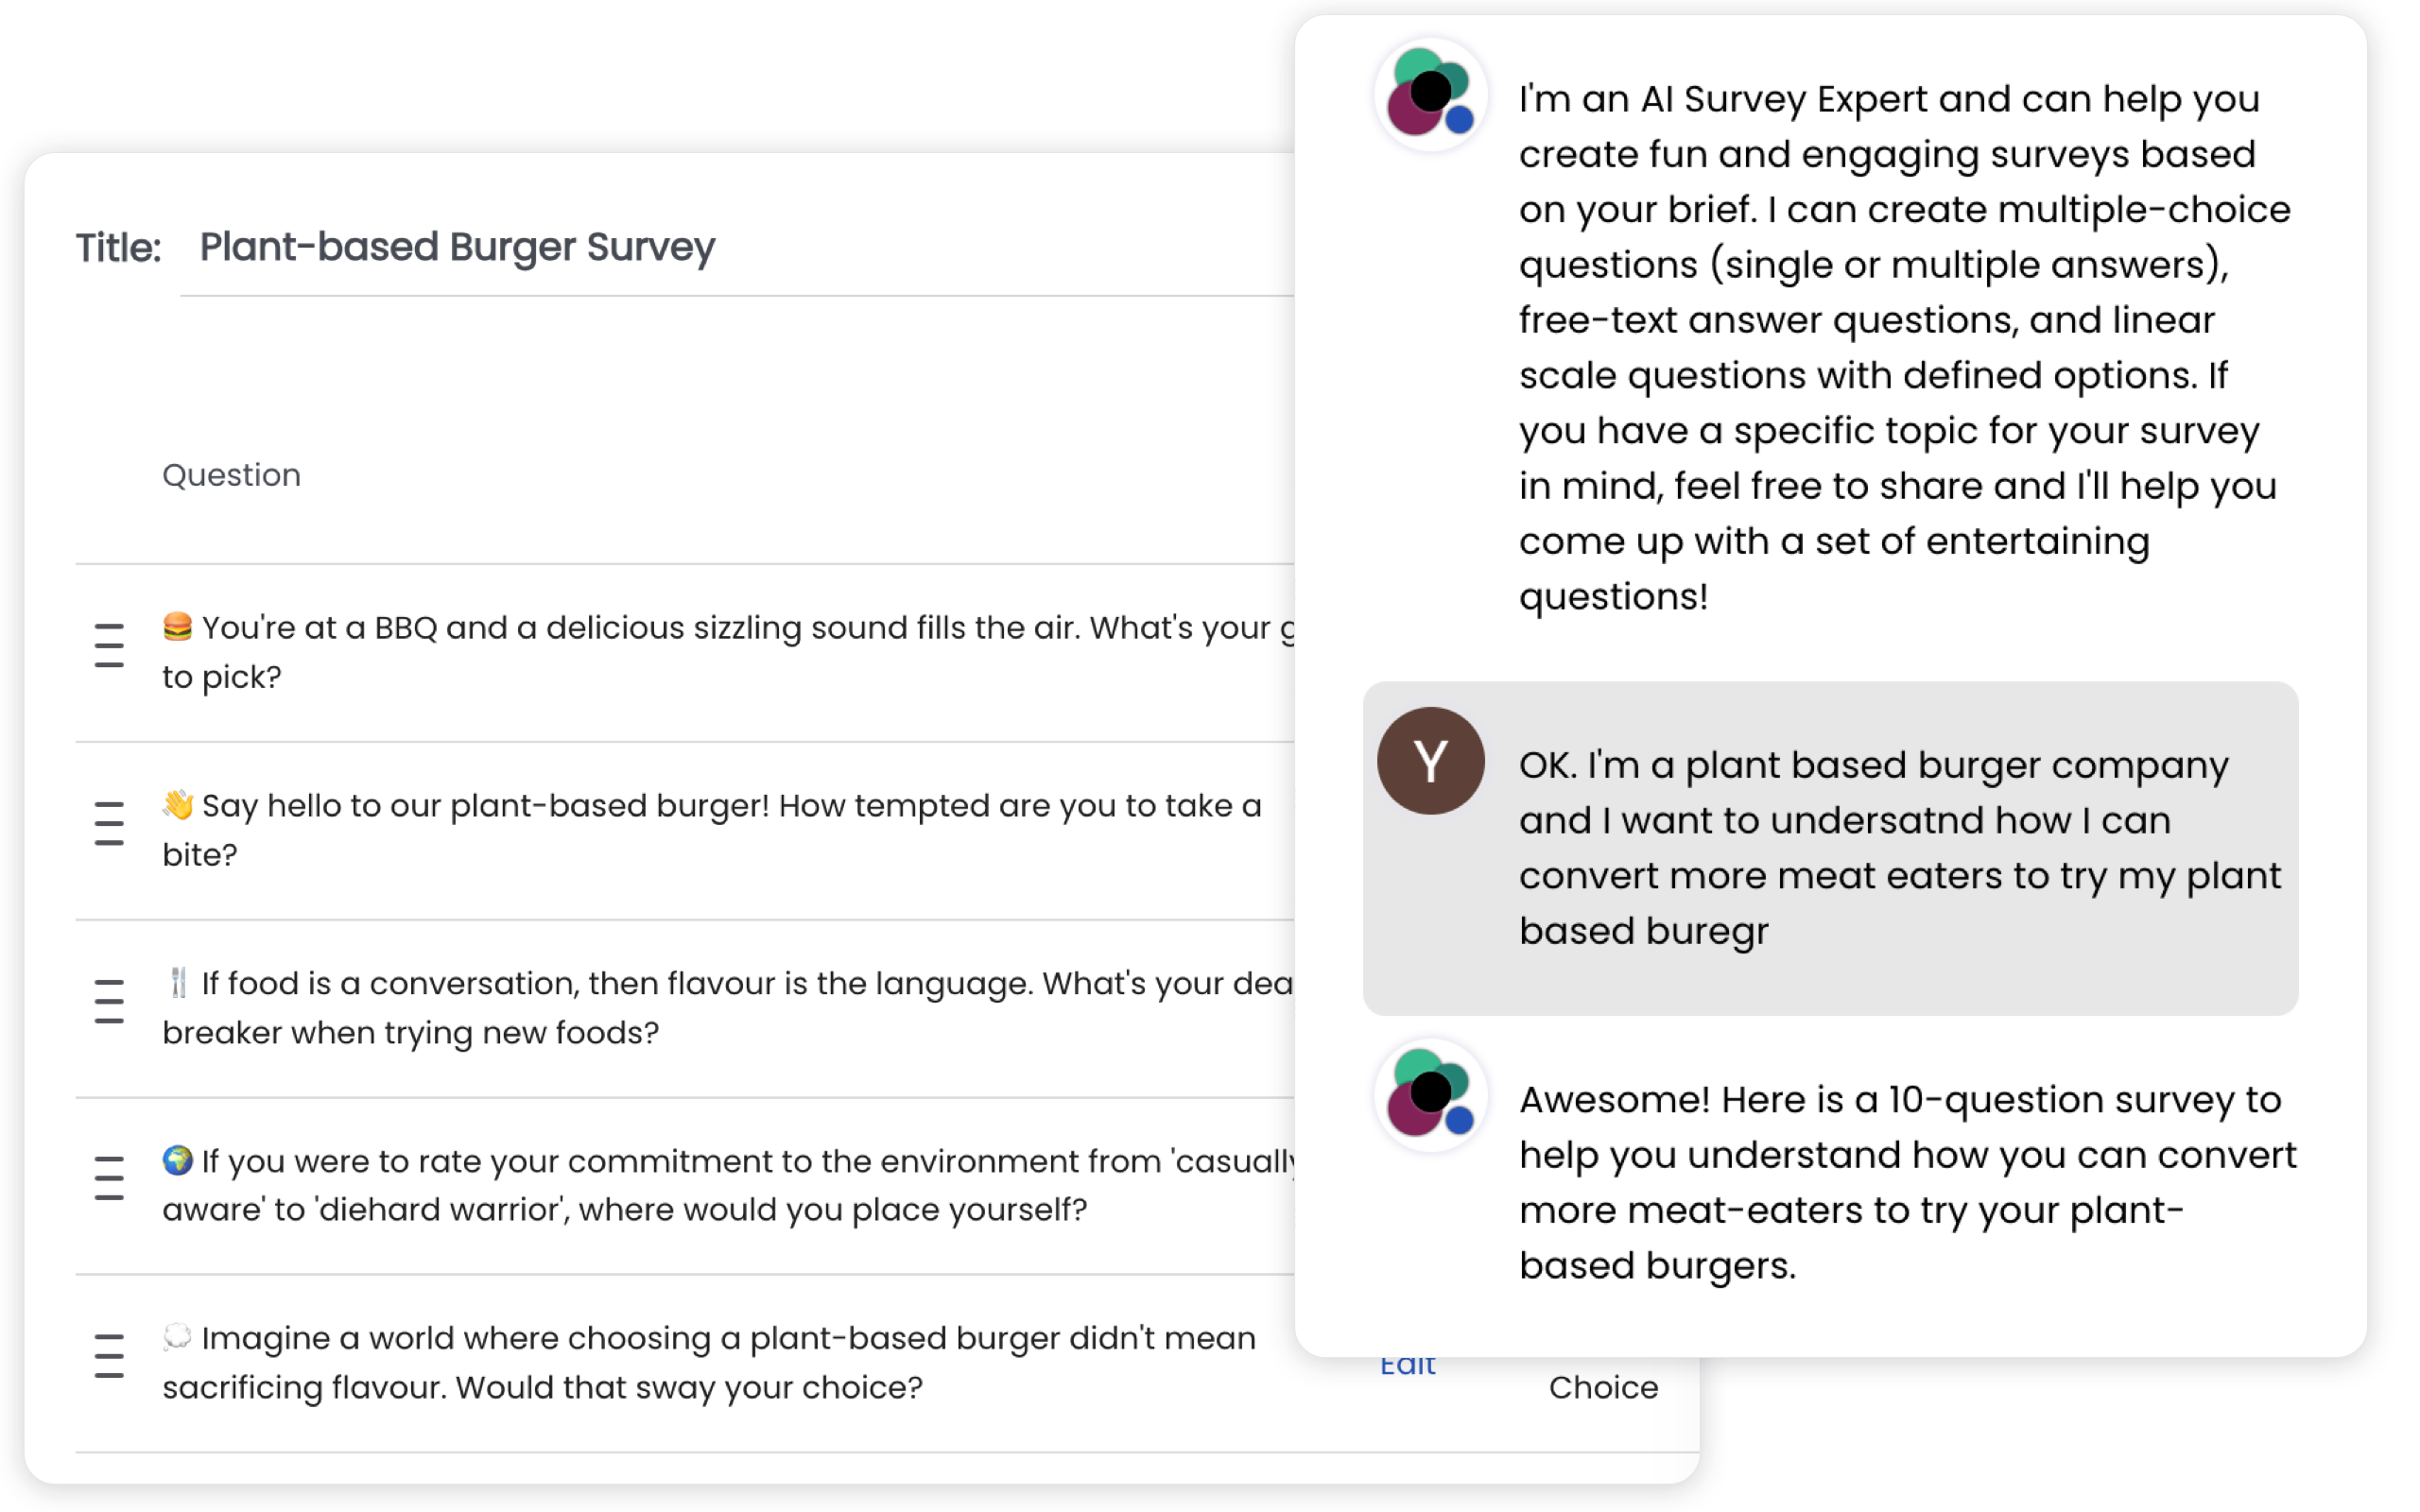 Chat with AI to create & edit your survey in seconds